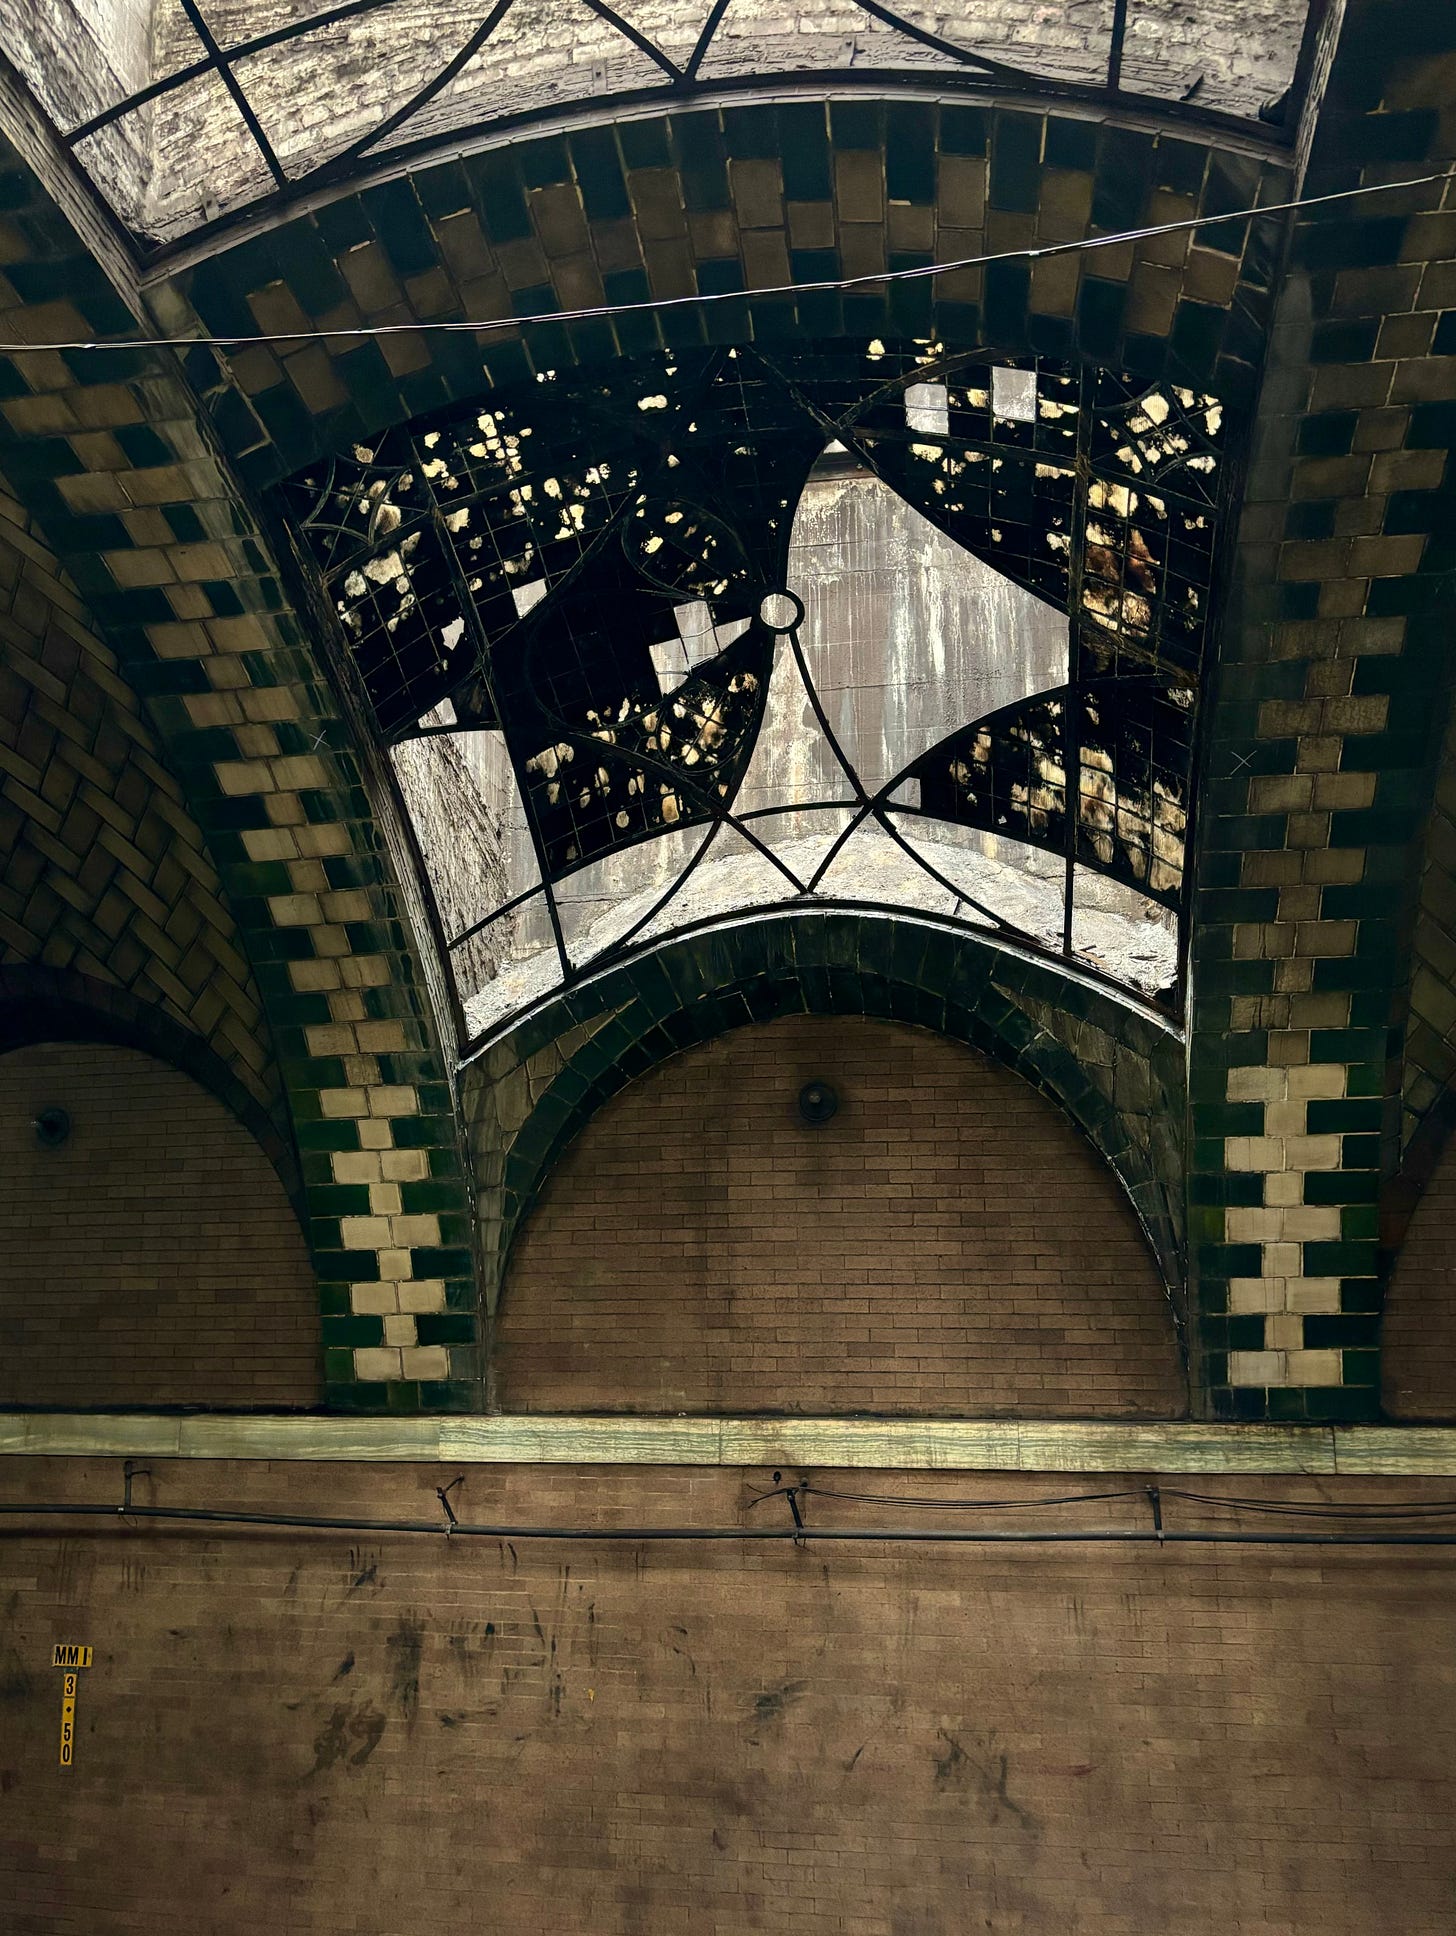 Green tiled arches cross what were once very ornate windows above the brick wall of the station.